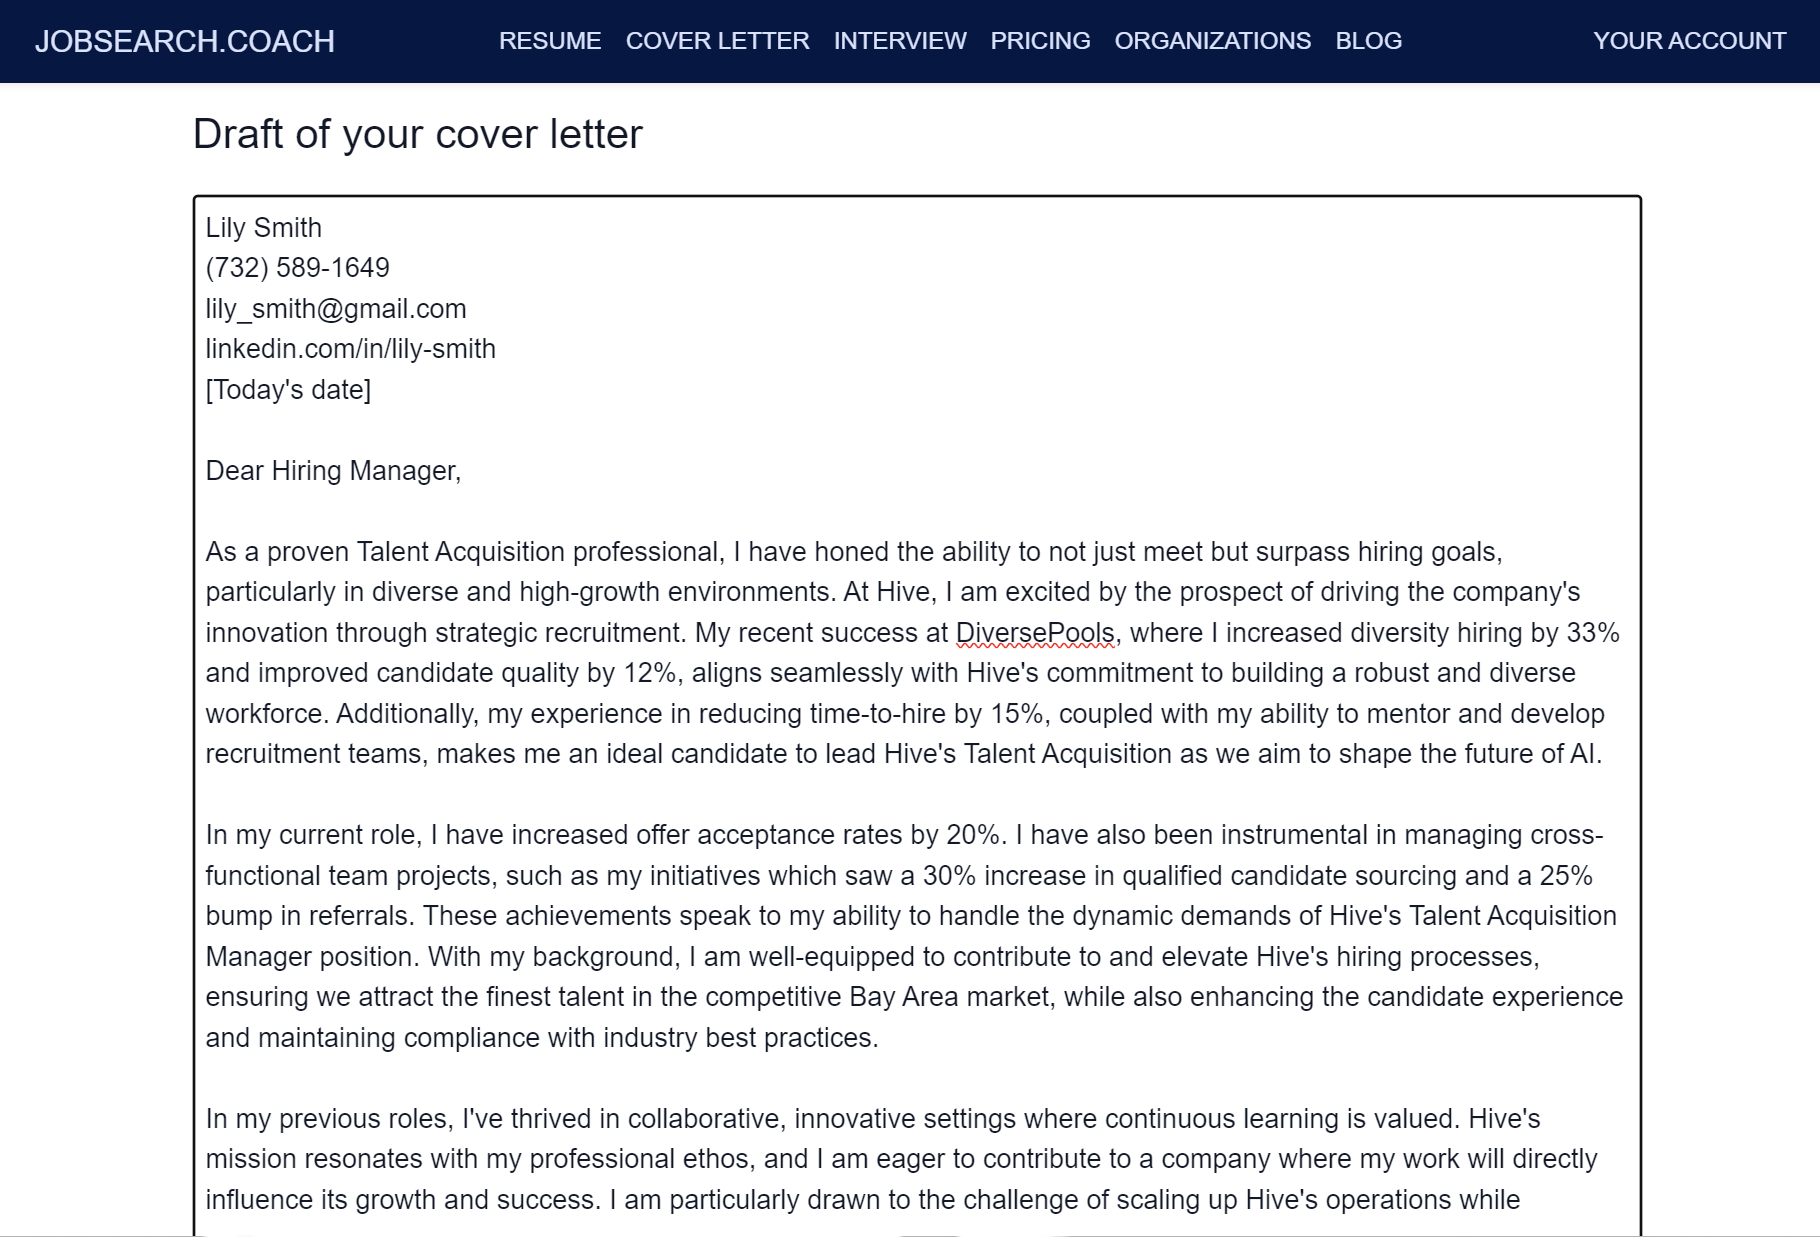 JobSearch.Coach Cover letter instantly drafted by AI